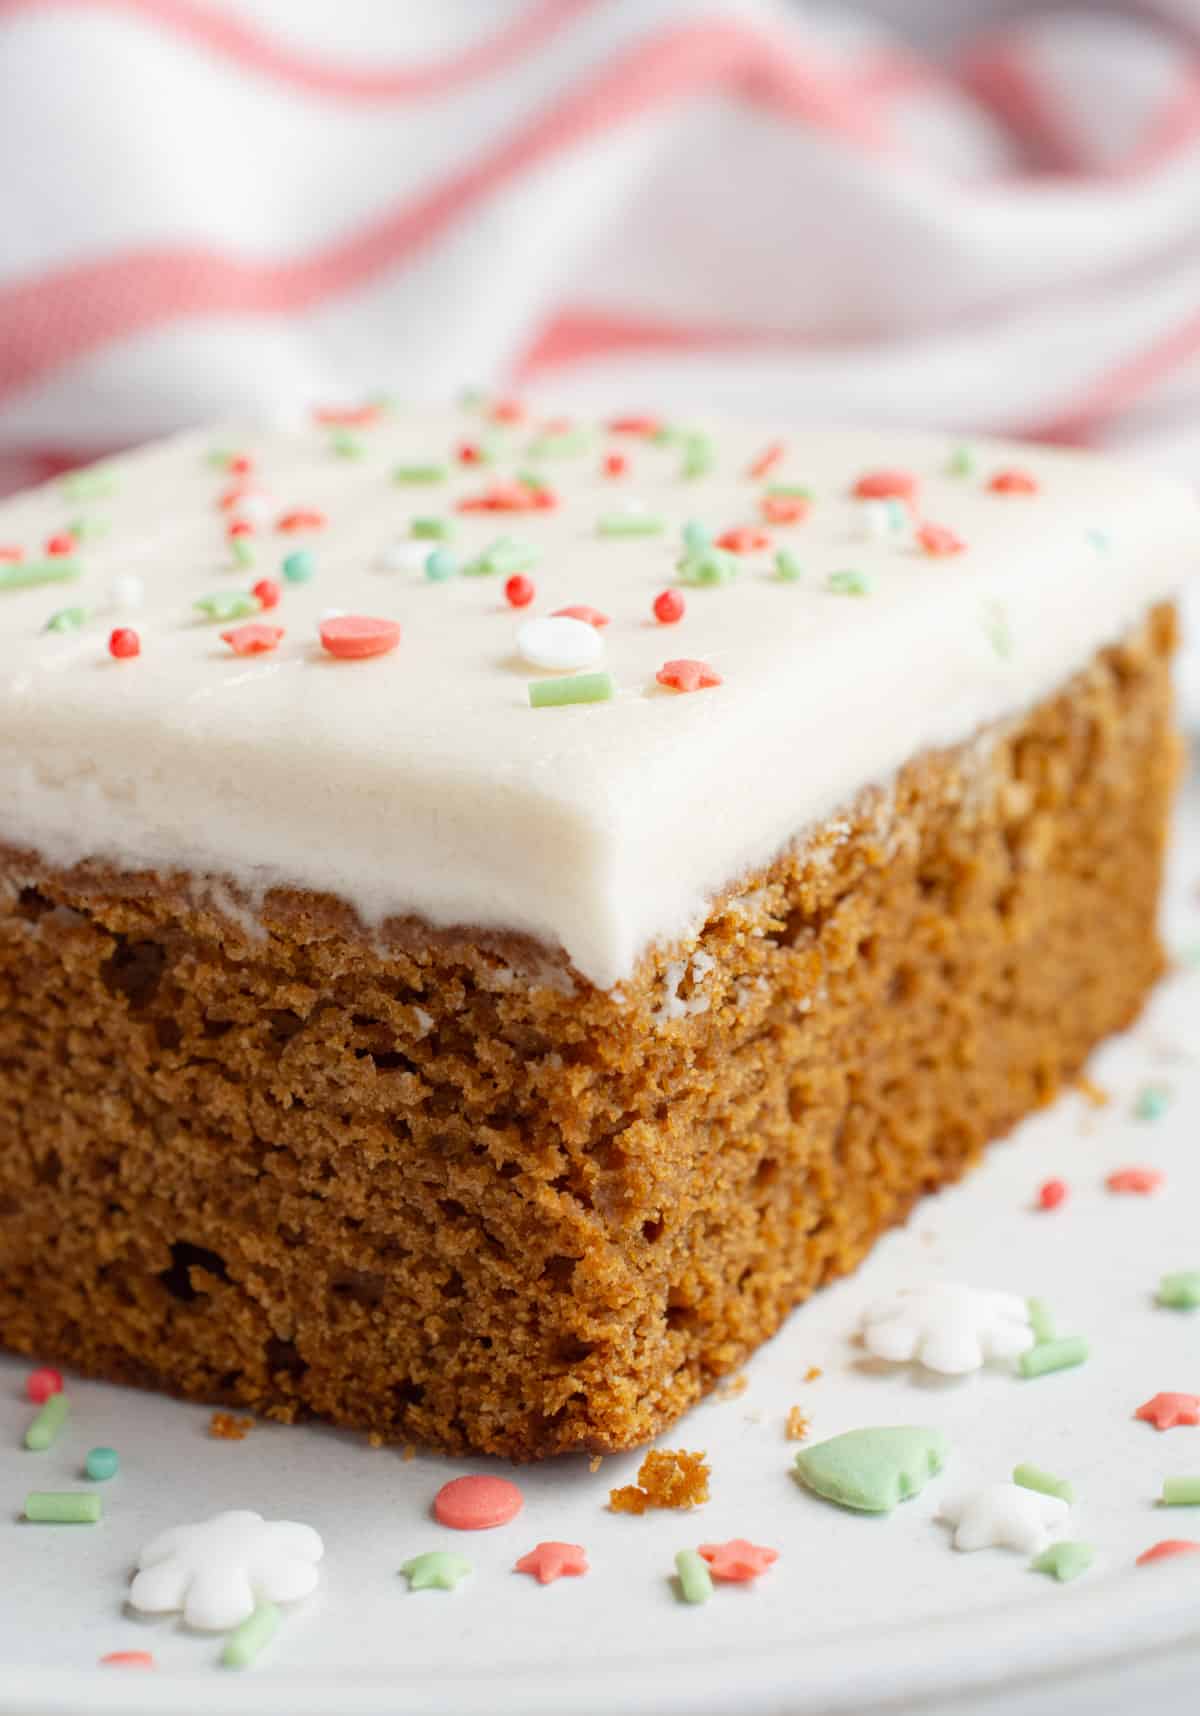 Vegan gingerbread cake topped with frosting and festive sprinkles.